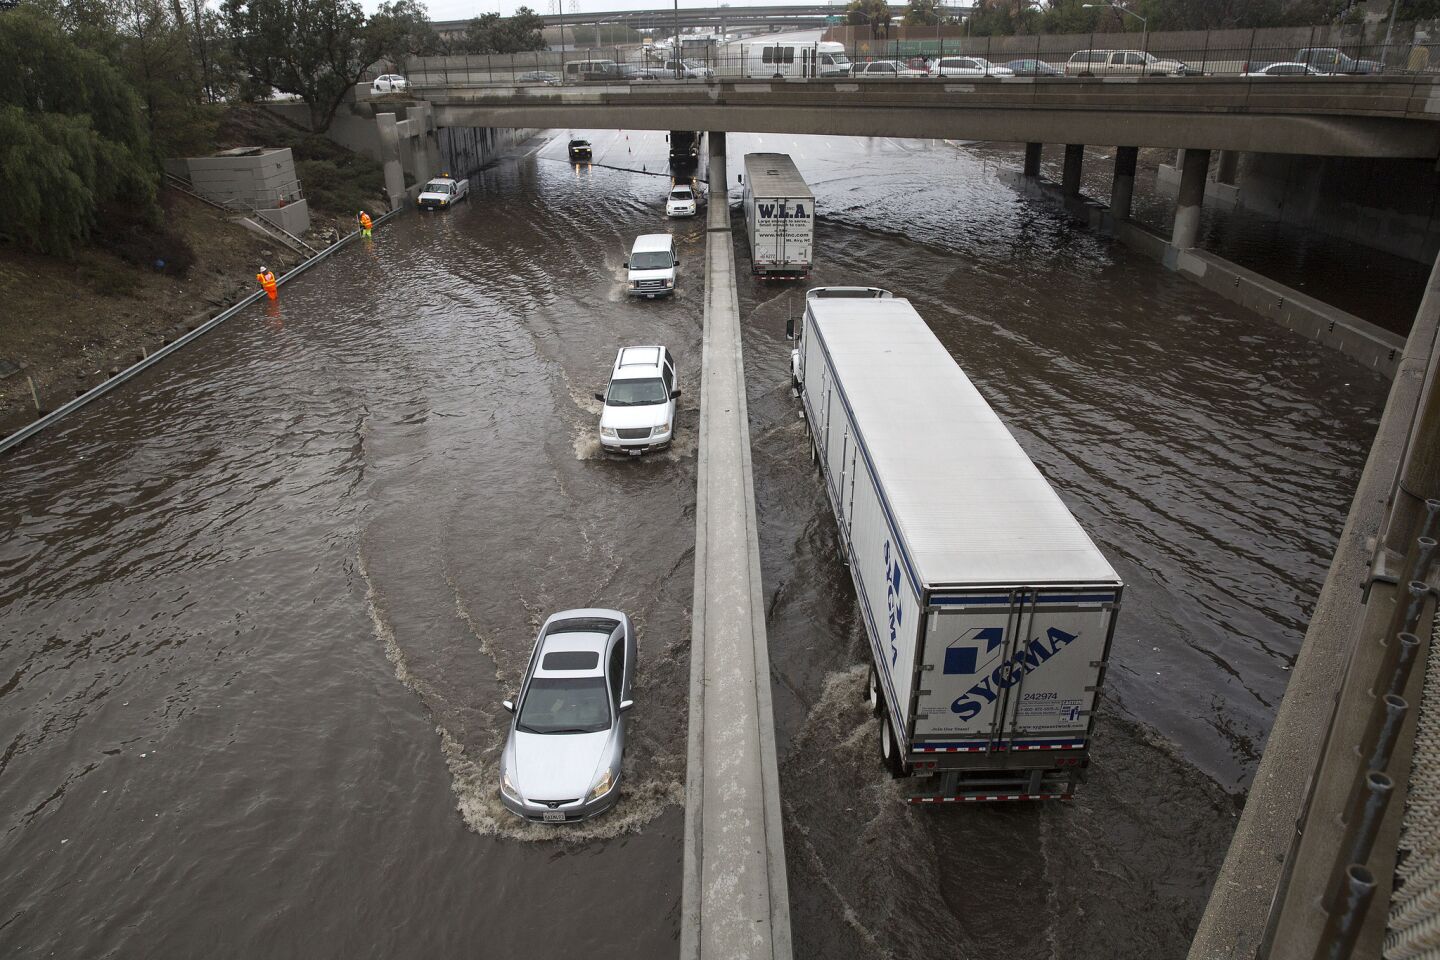 CHP officers limit traffic on a flooded Interstate 5 to one lane in each direction as Caltrans workers work to clear drains in Sun Valley, Calif.